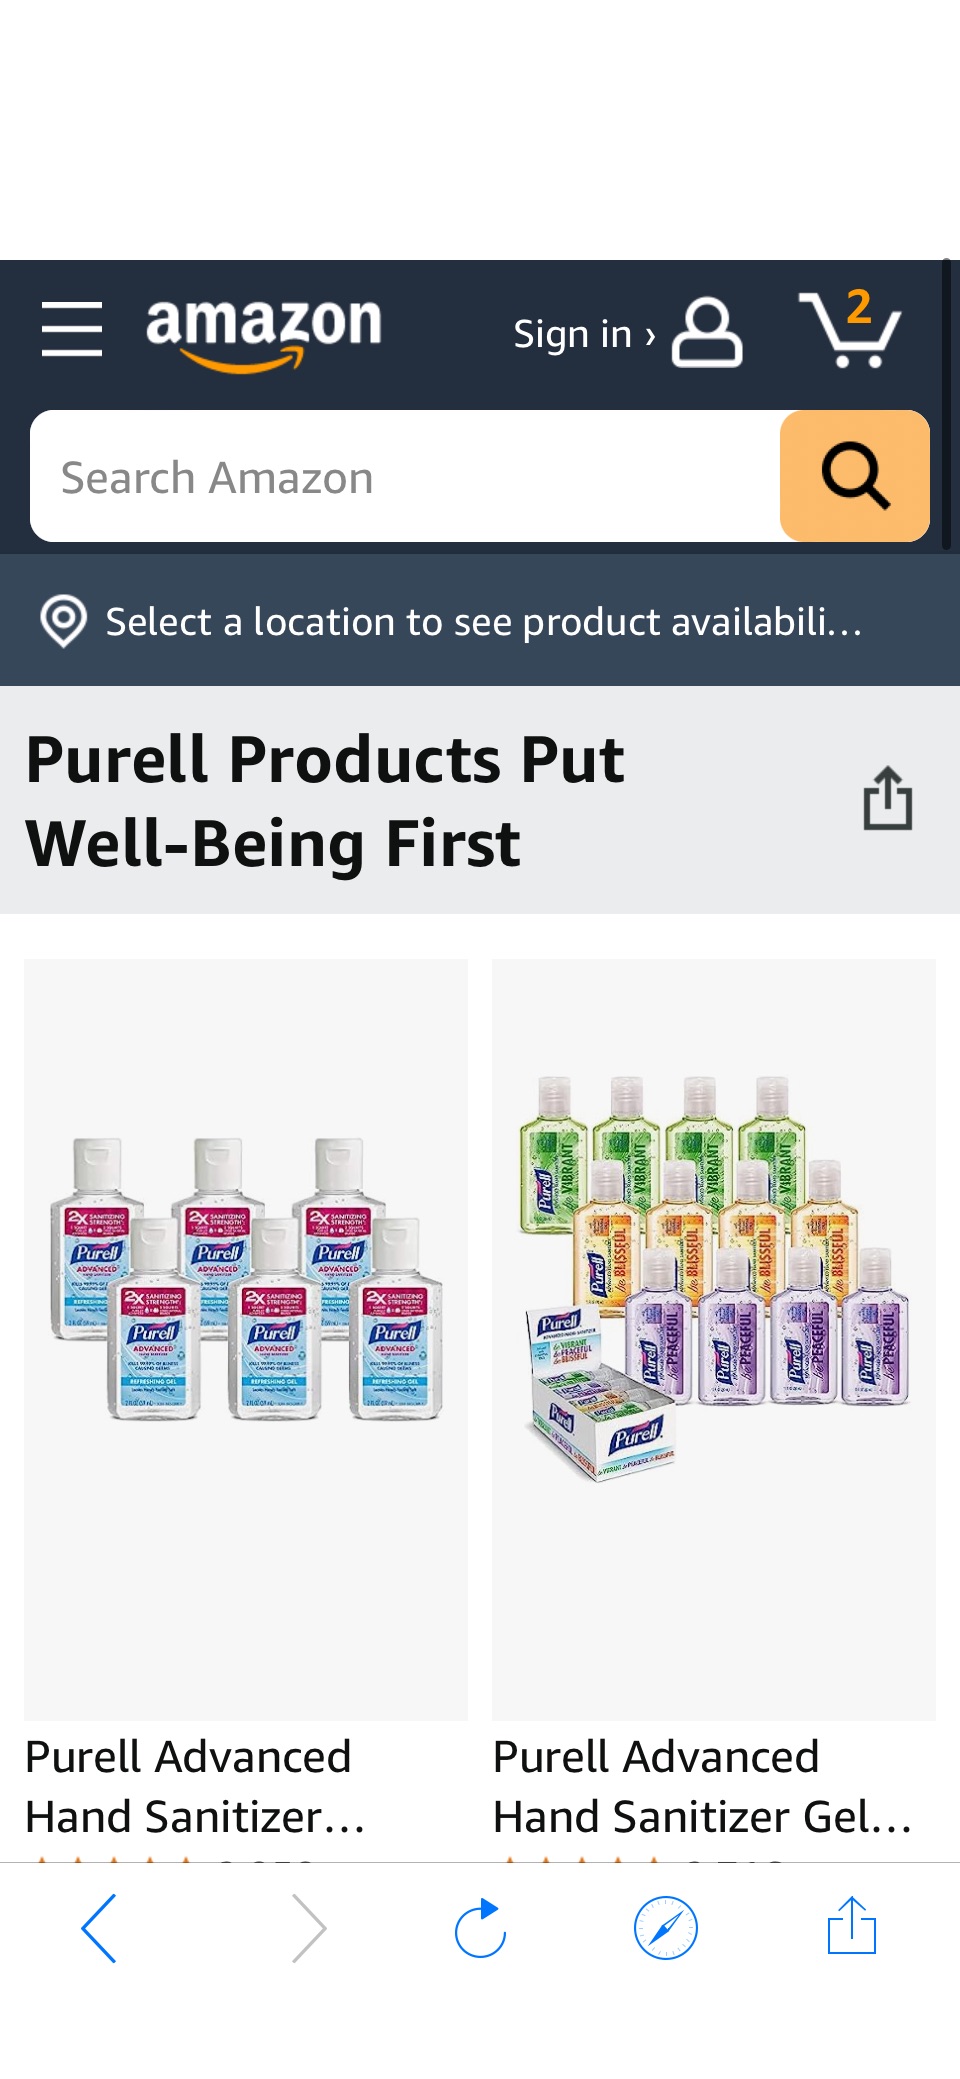 Purell Products Put Well-Being First促销11.19起